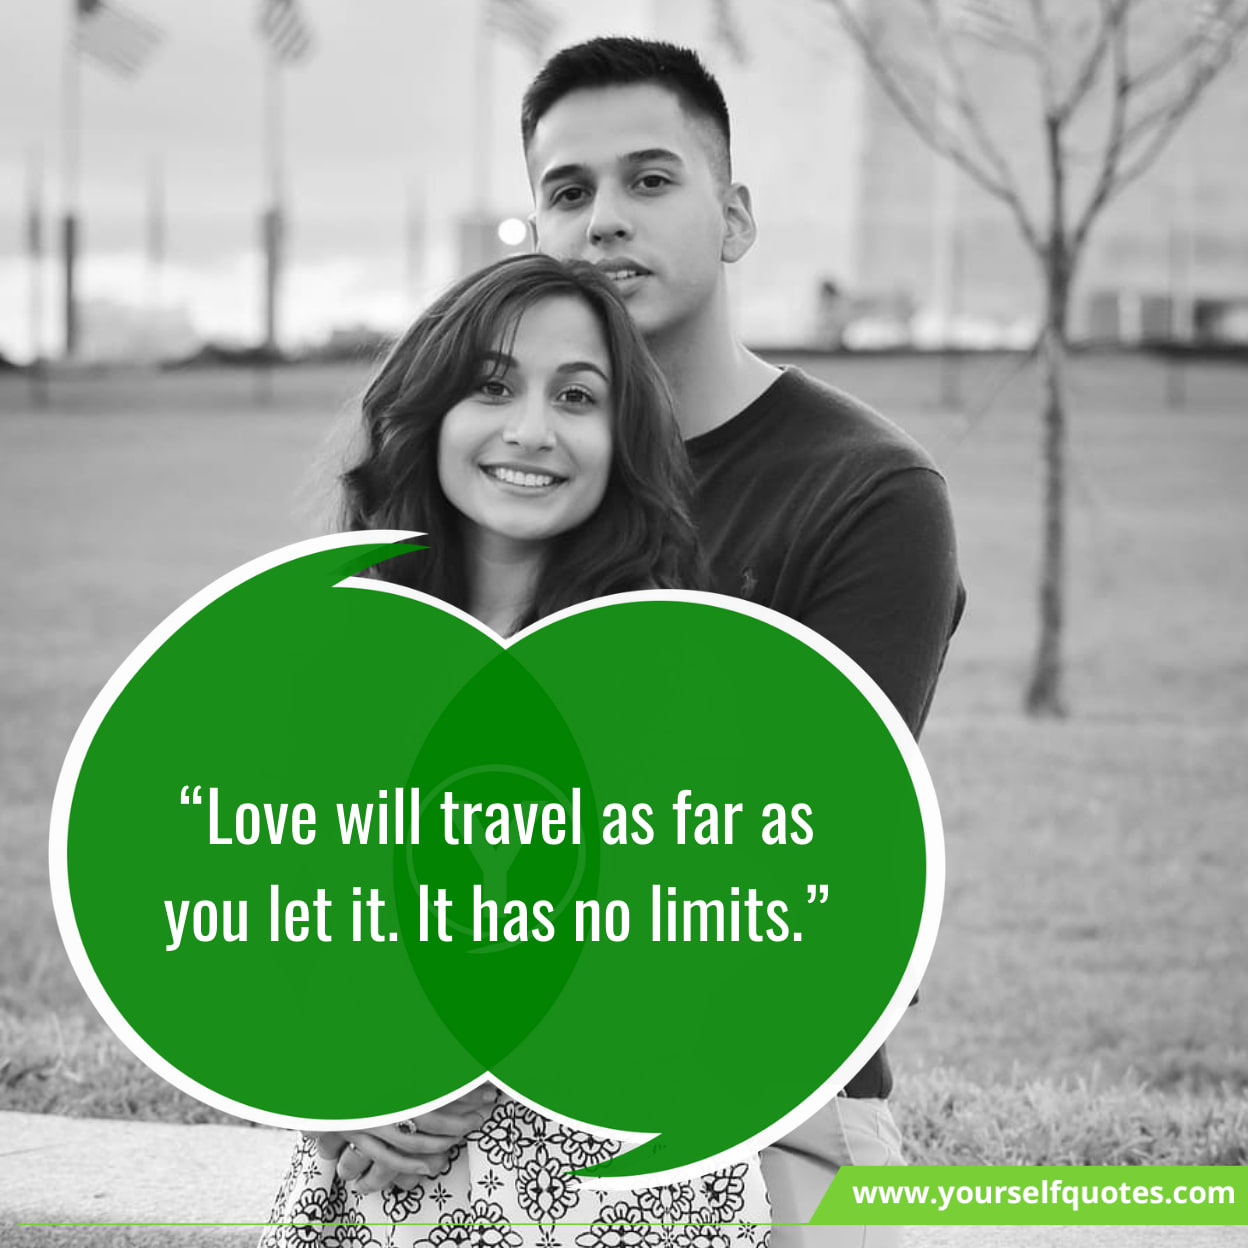 Inspiring Quotes On Long-Distance Relationship